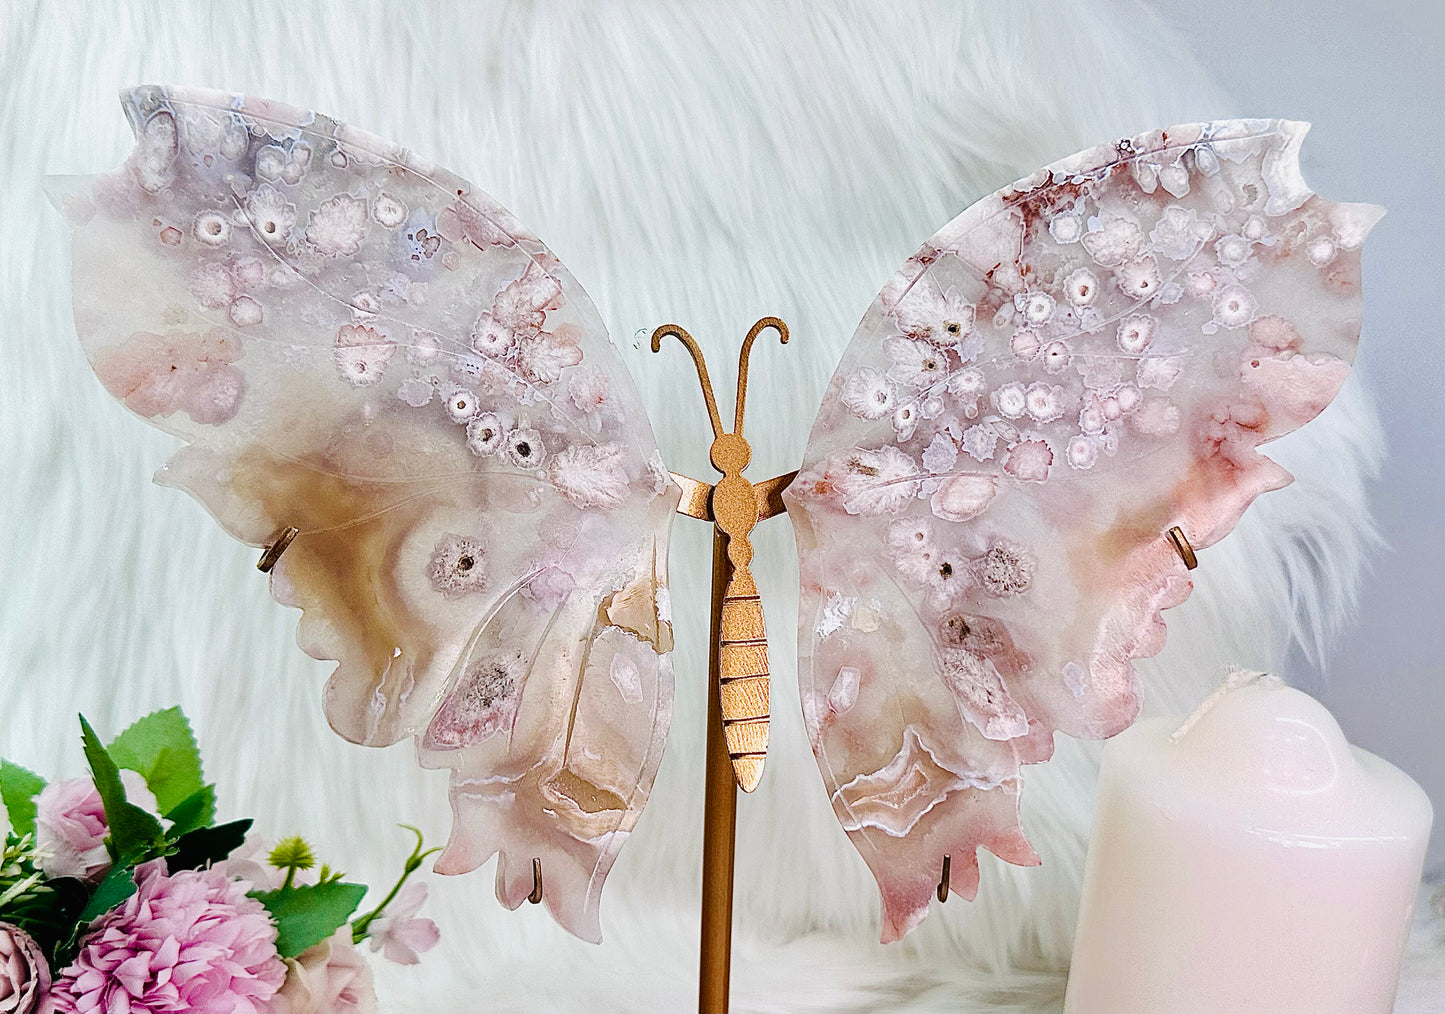 Classy & Absolutely Fabulous Large 30cm (Inc Stand) Druzy Flower Agate Perfectly Carved Butterfly Wings on Gold Stand From Madagascar